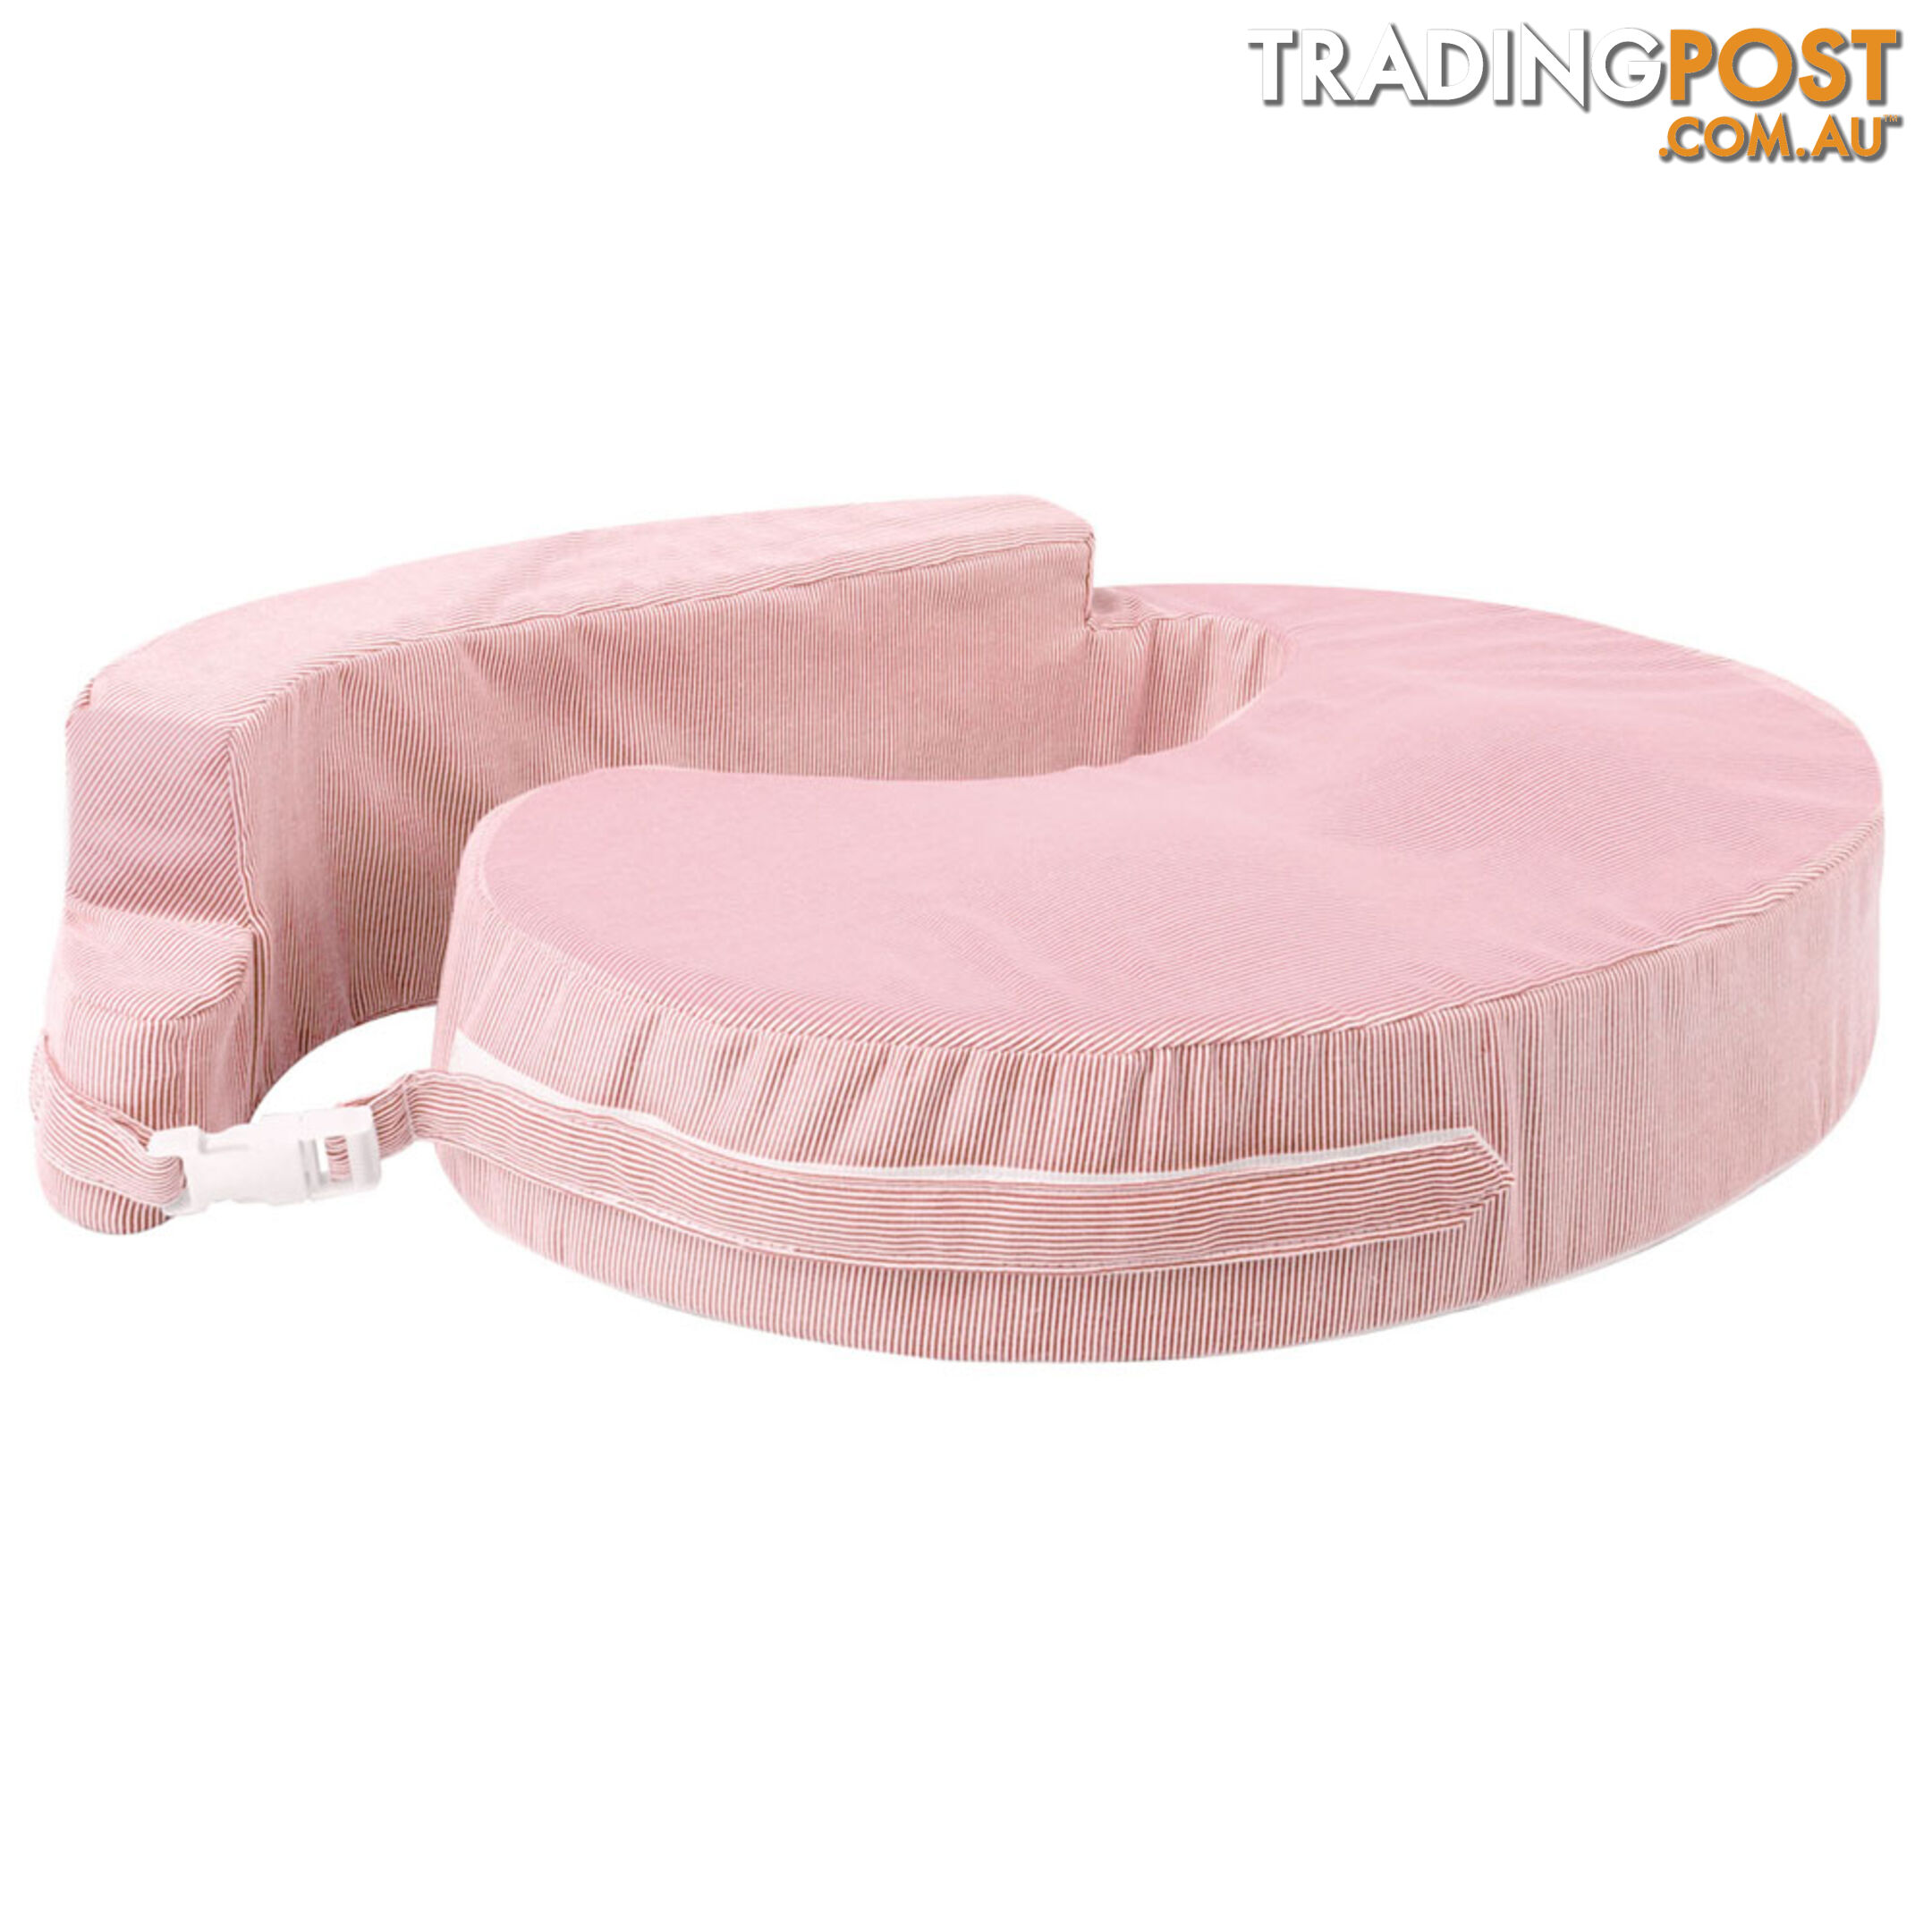 Baby Breast Feeding Support Memory Foam Pillow w/ Zip Cover Pink